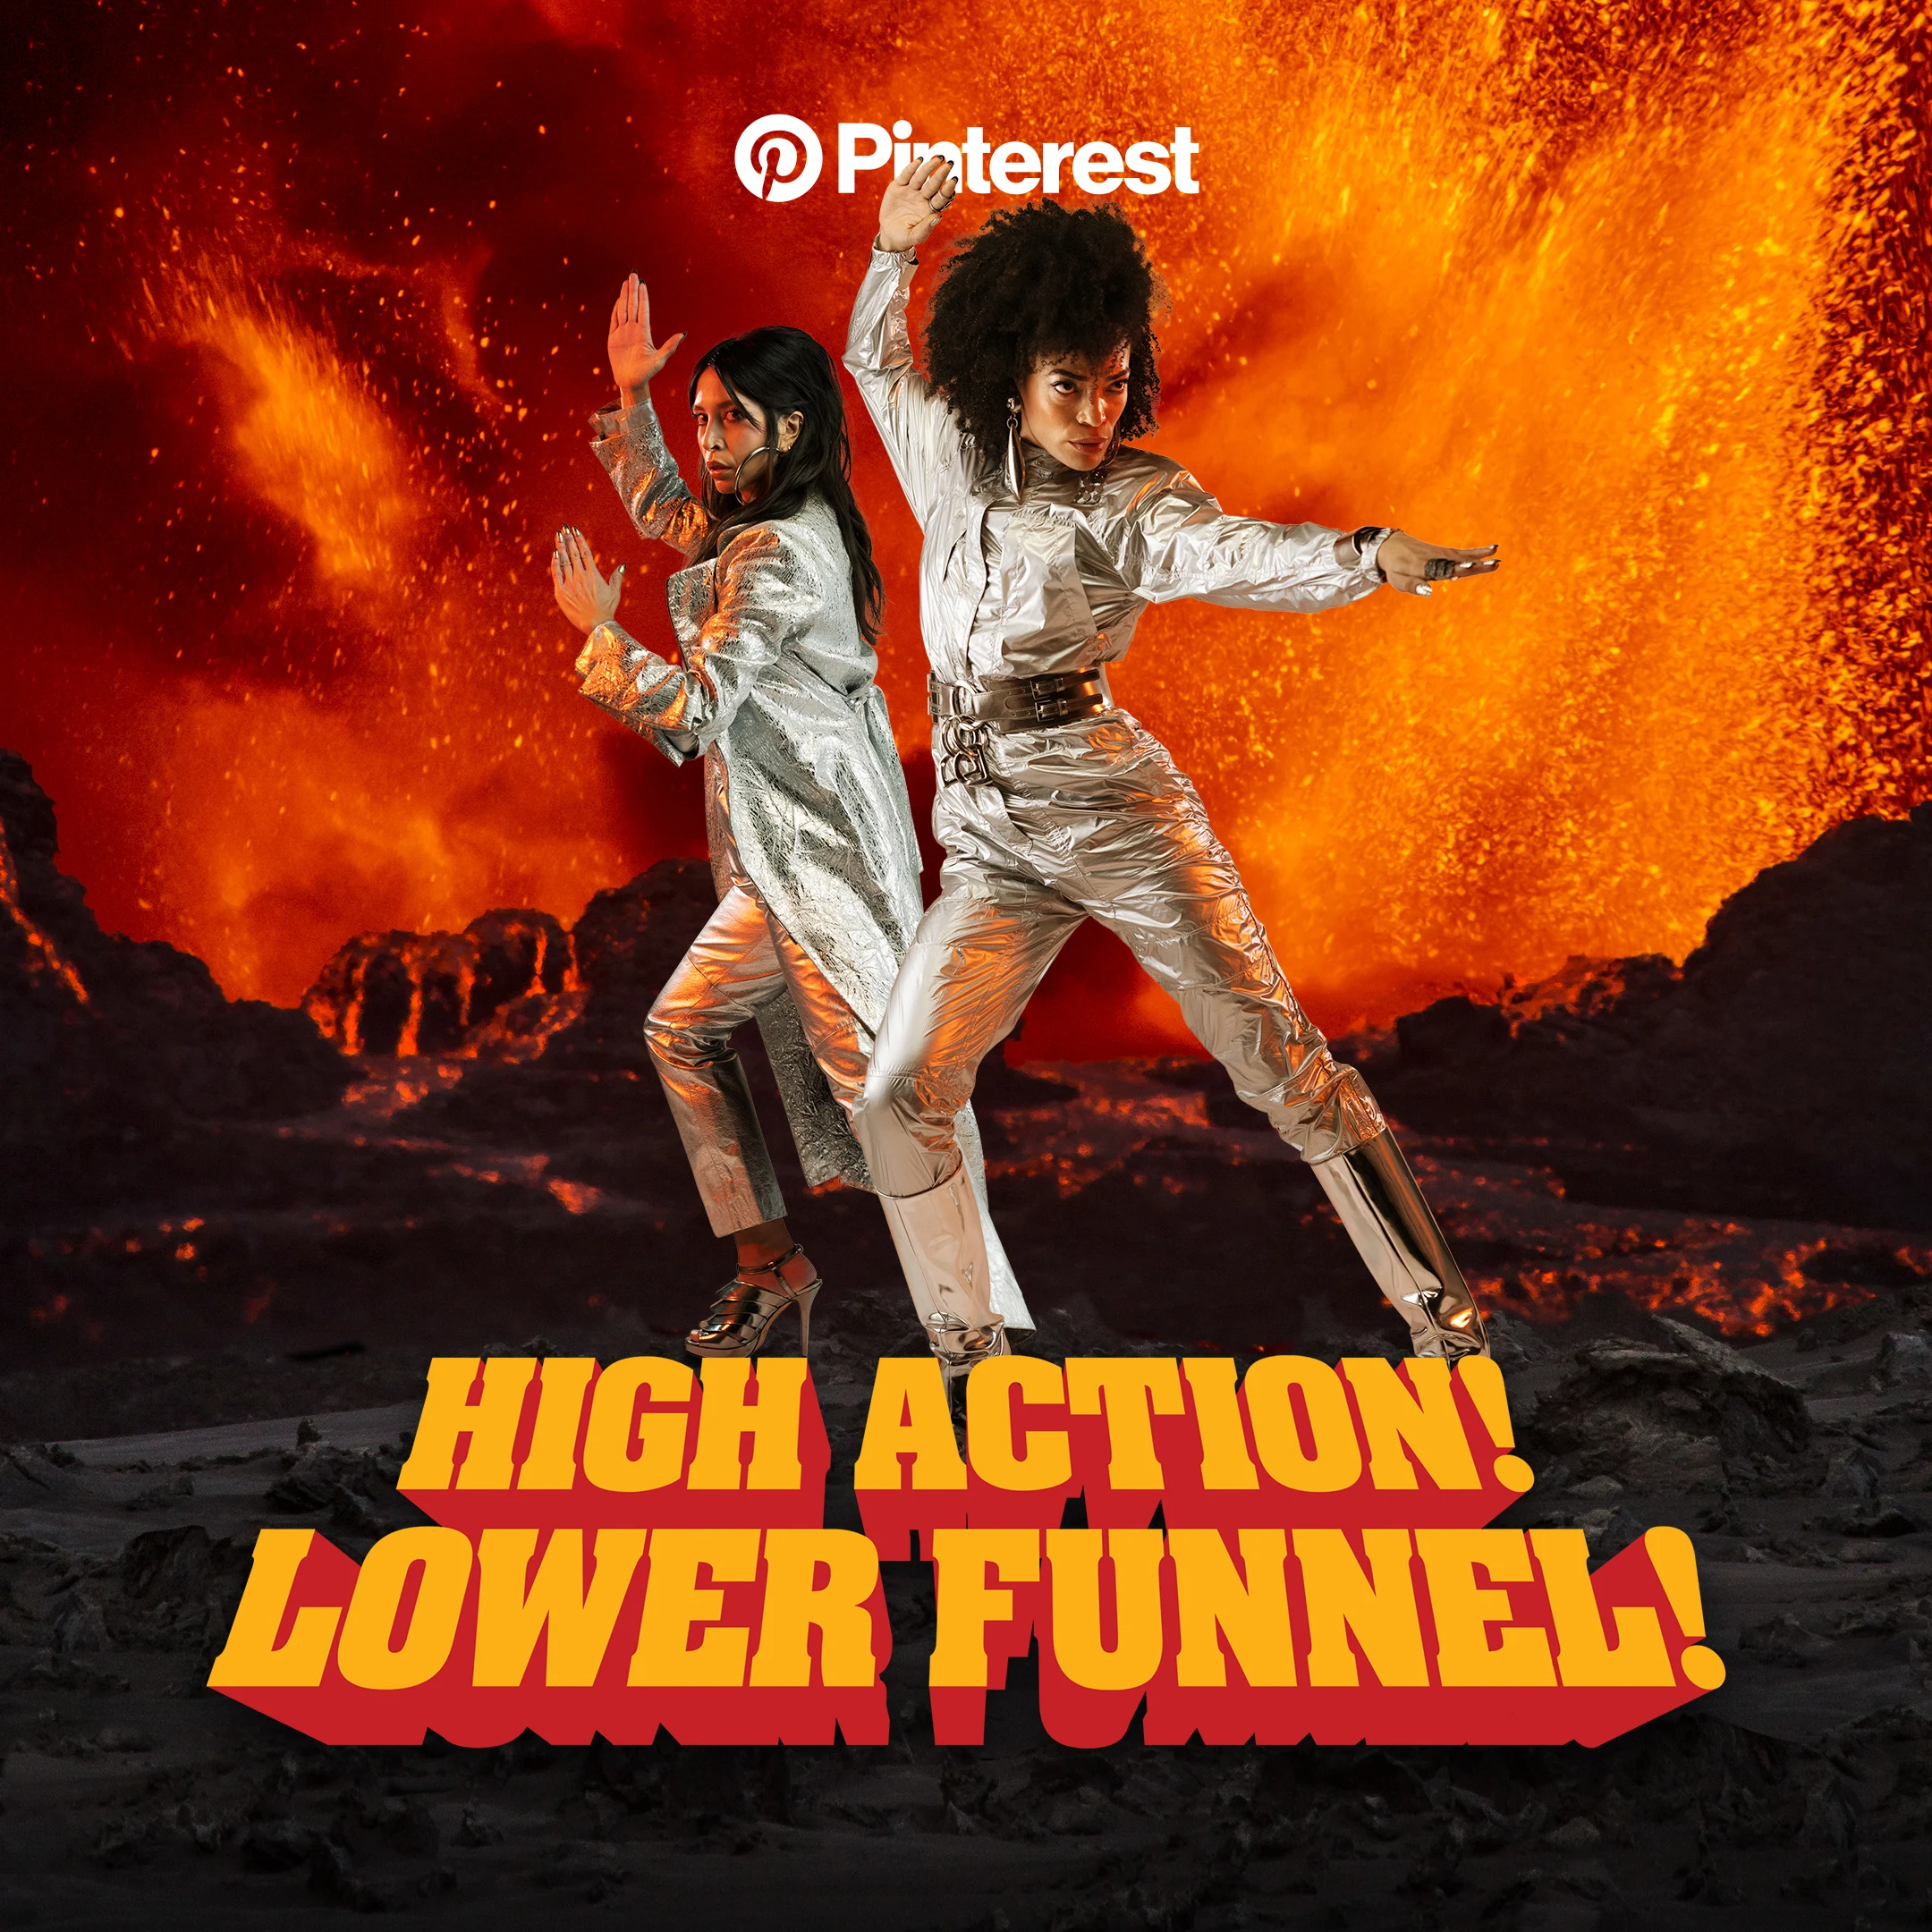 A movie poster depicts two women in chrome jumpsuits in front of a volcano with the words "High action! Lower funnel!"